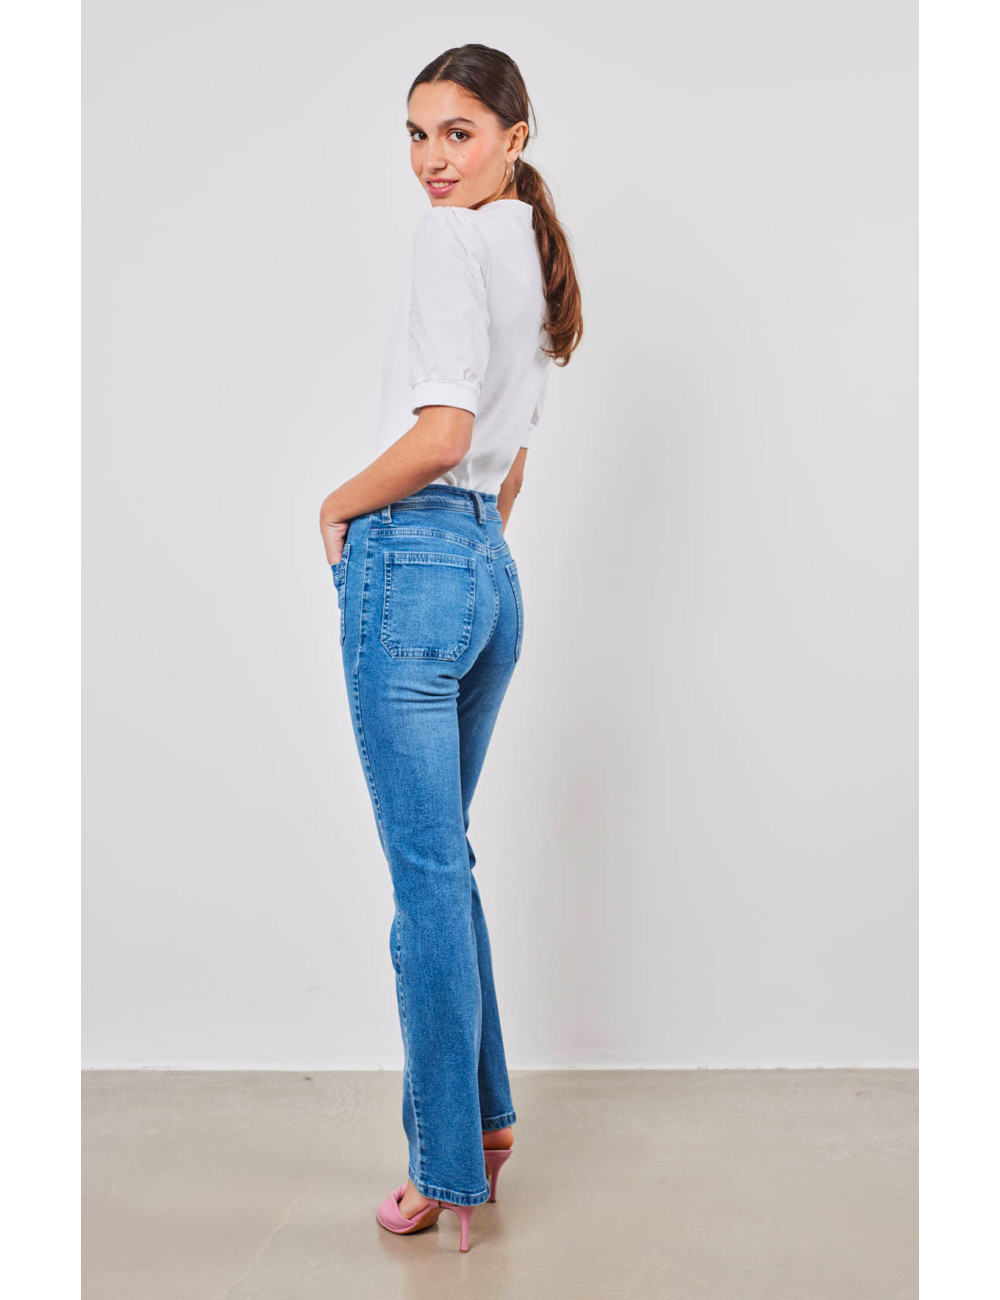 JEANS FLARE - 